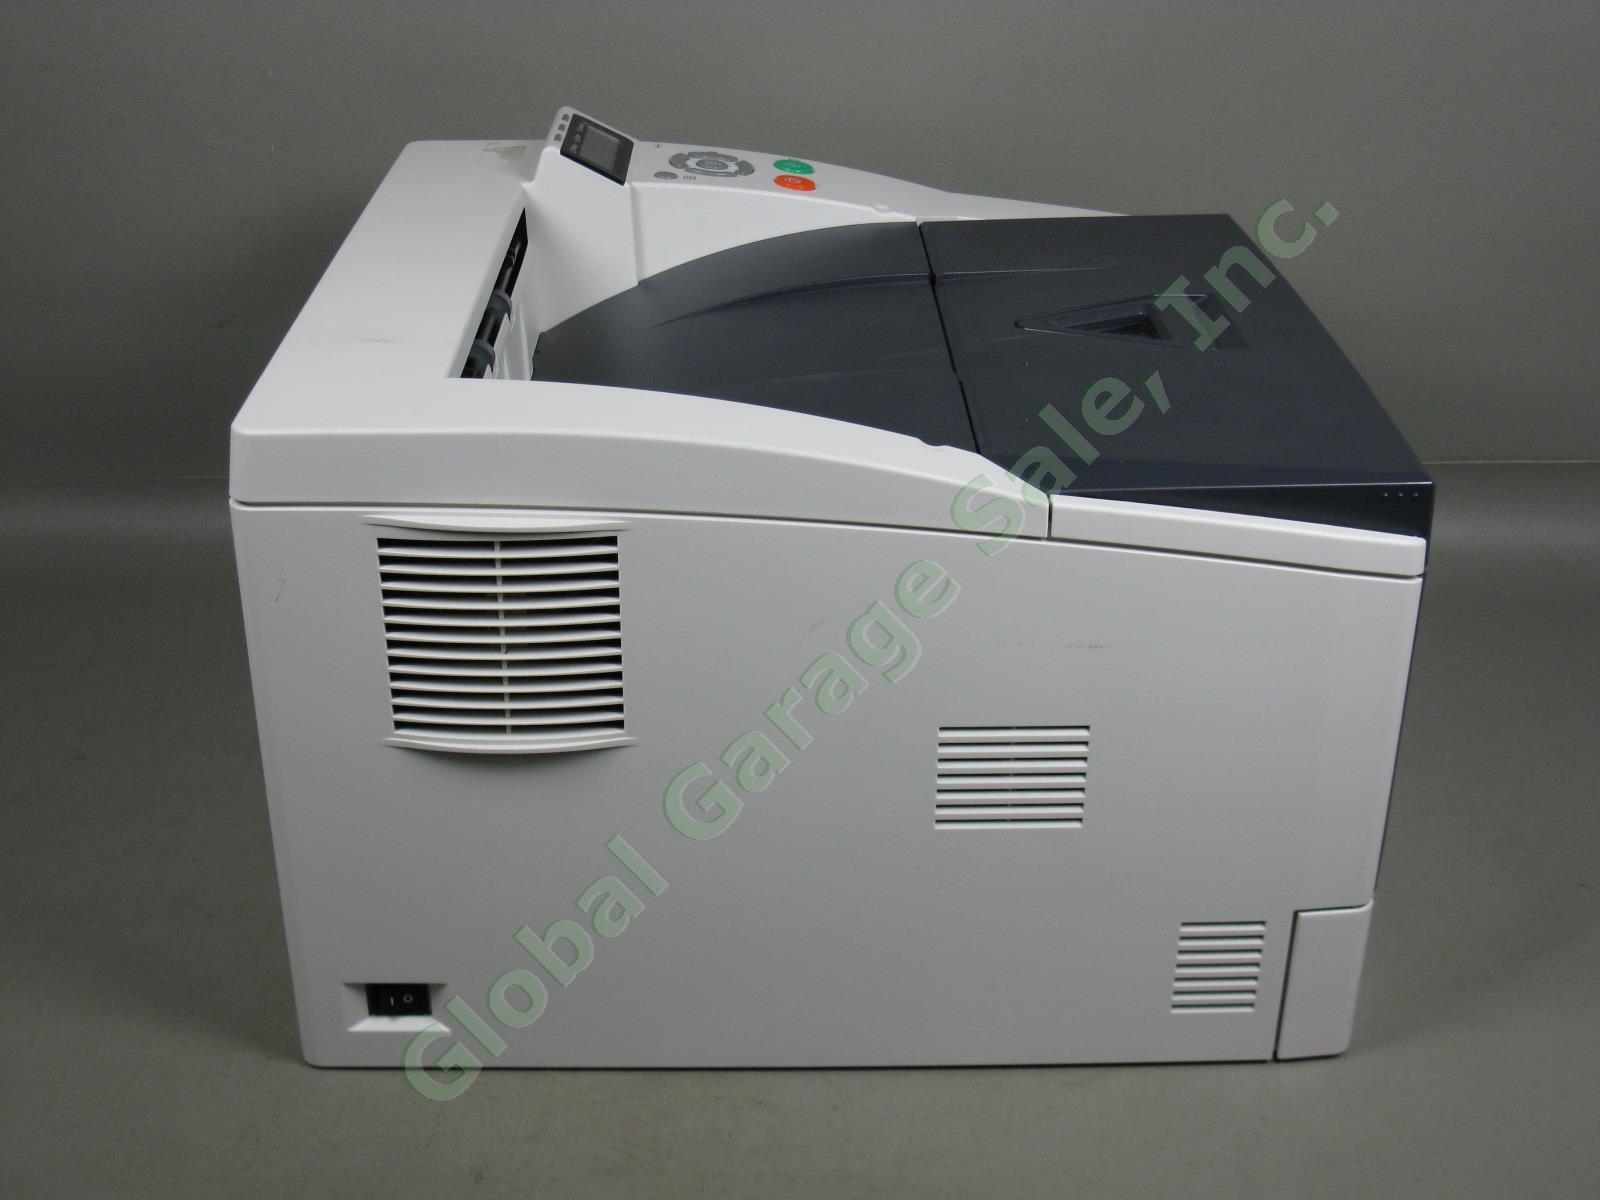 Kyocera Ecosys FS-1370DN Workgroup Network Laser Printer 40% Toner 6851 Pages 6